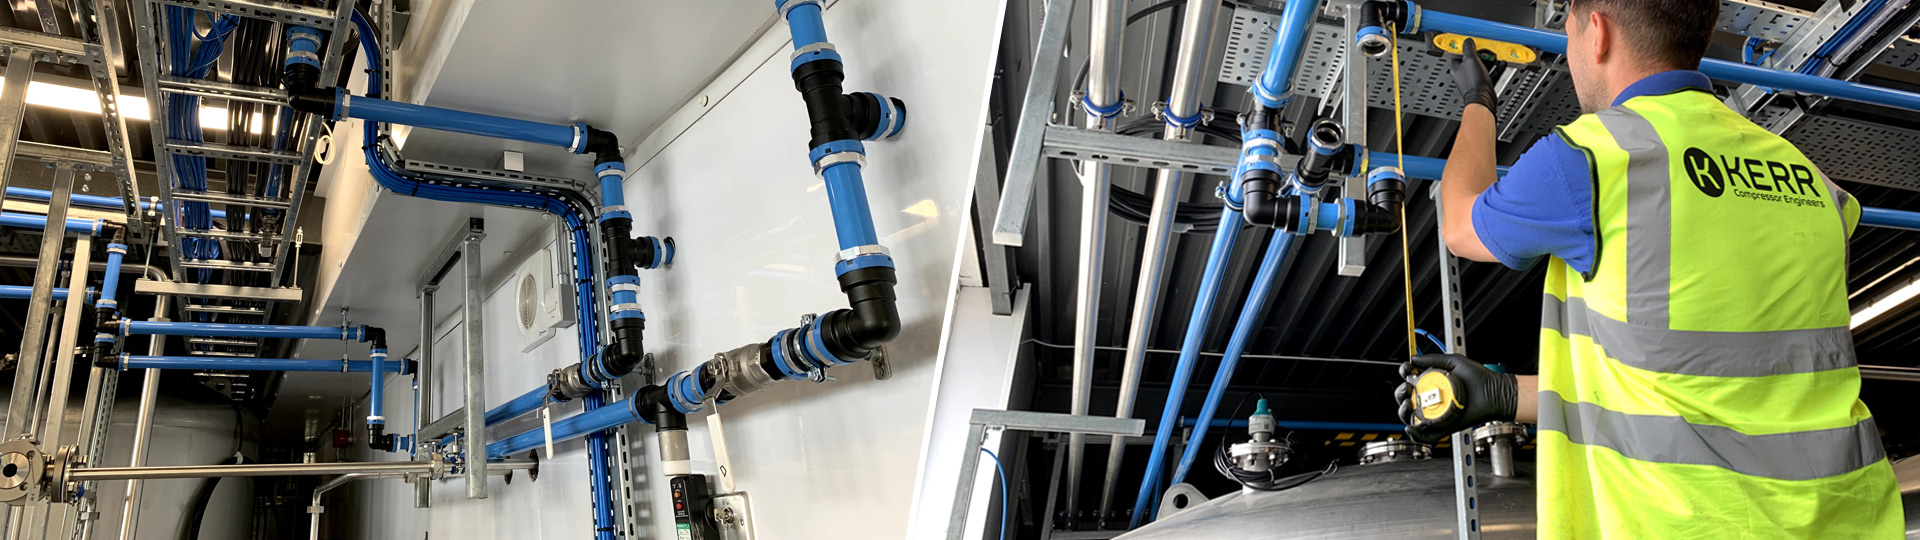 Compressed Air Pipework Systems & Solutions